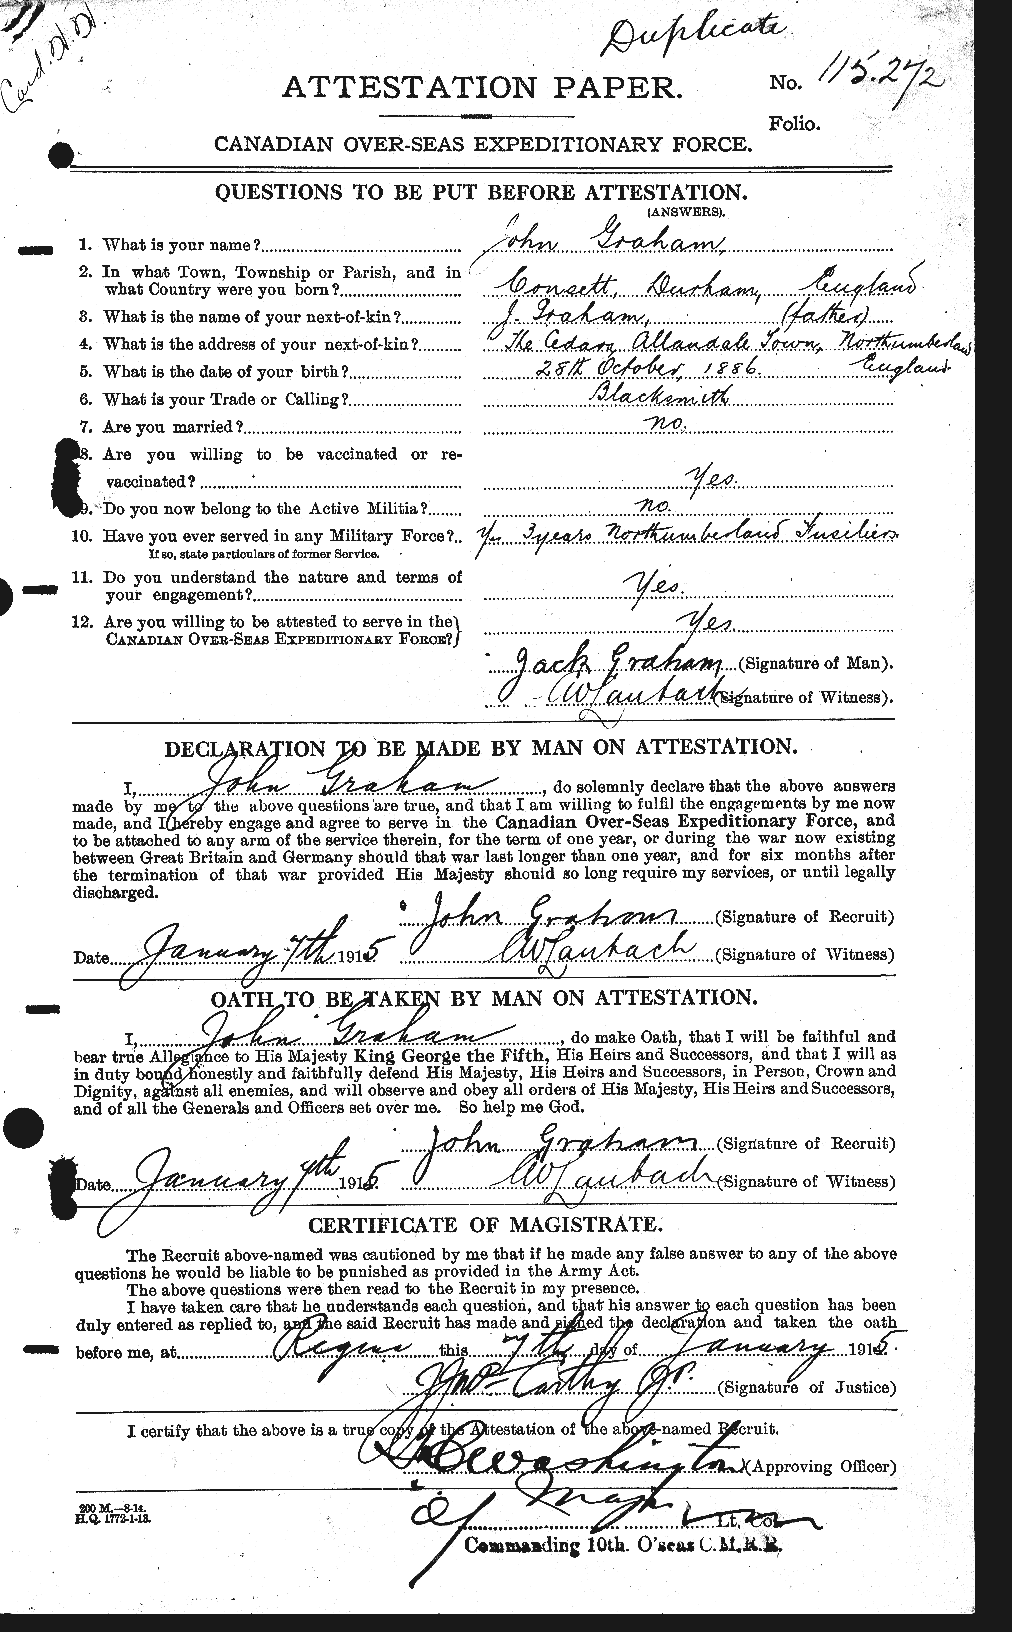 Personnel Records of the First World War - CEF 359122a